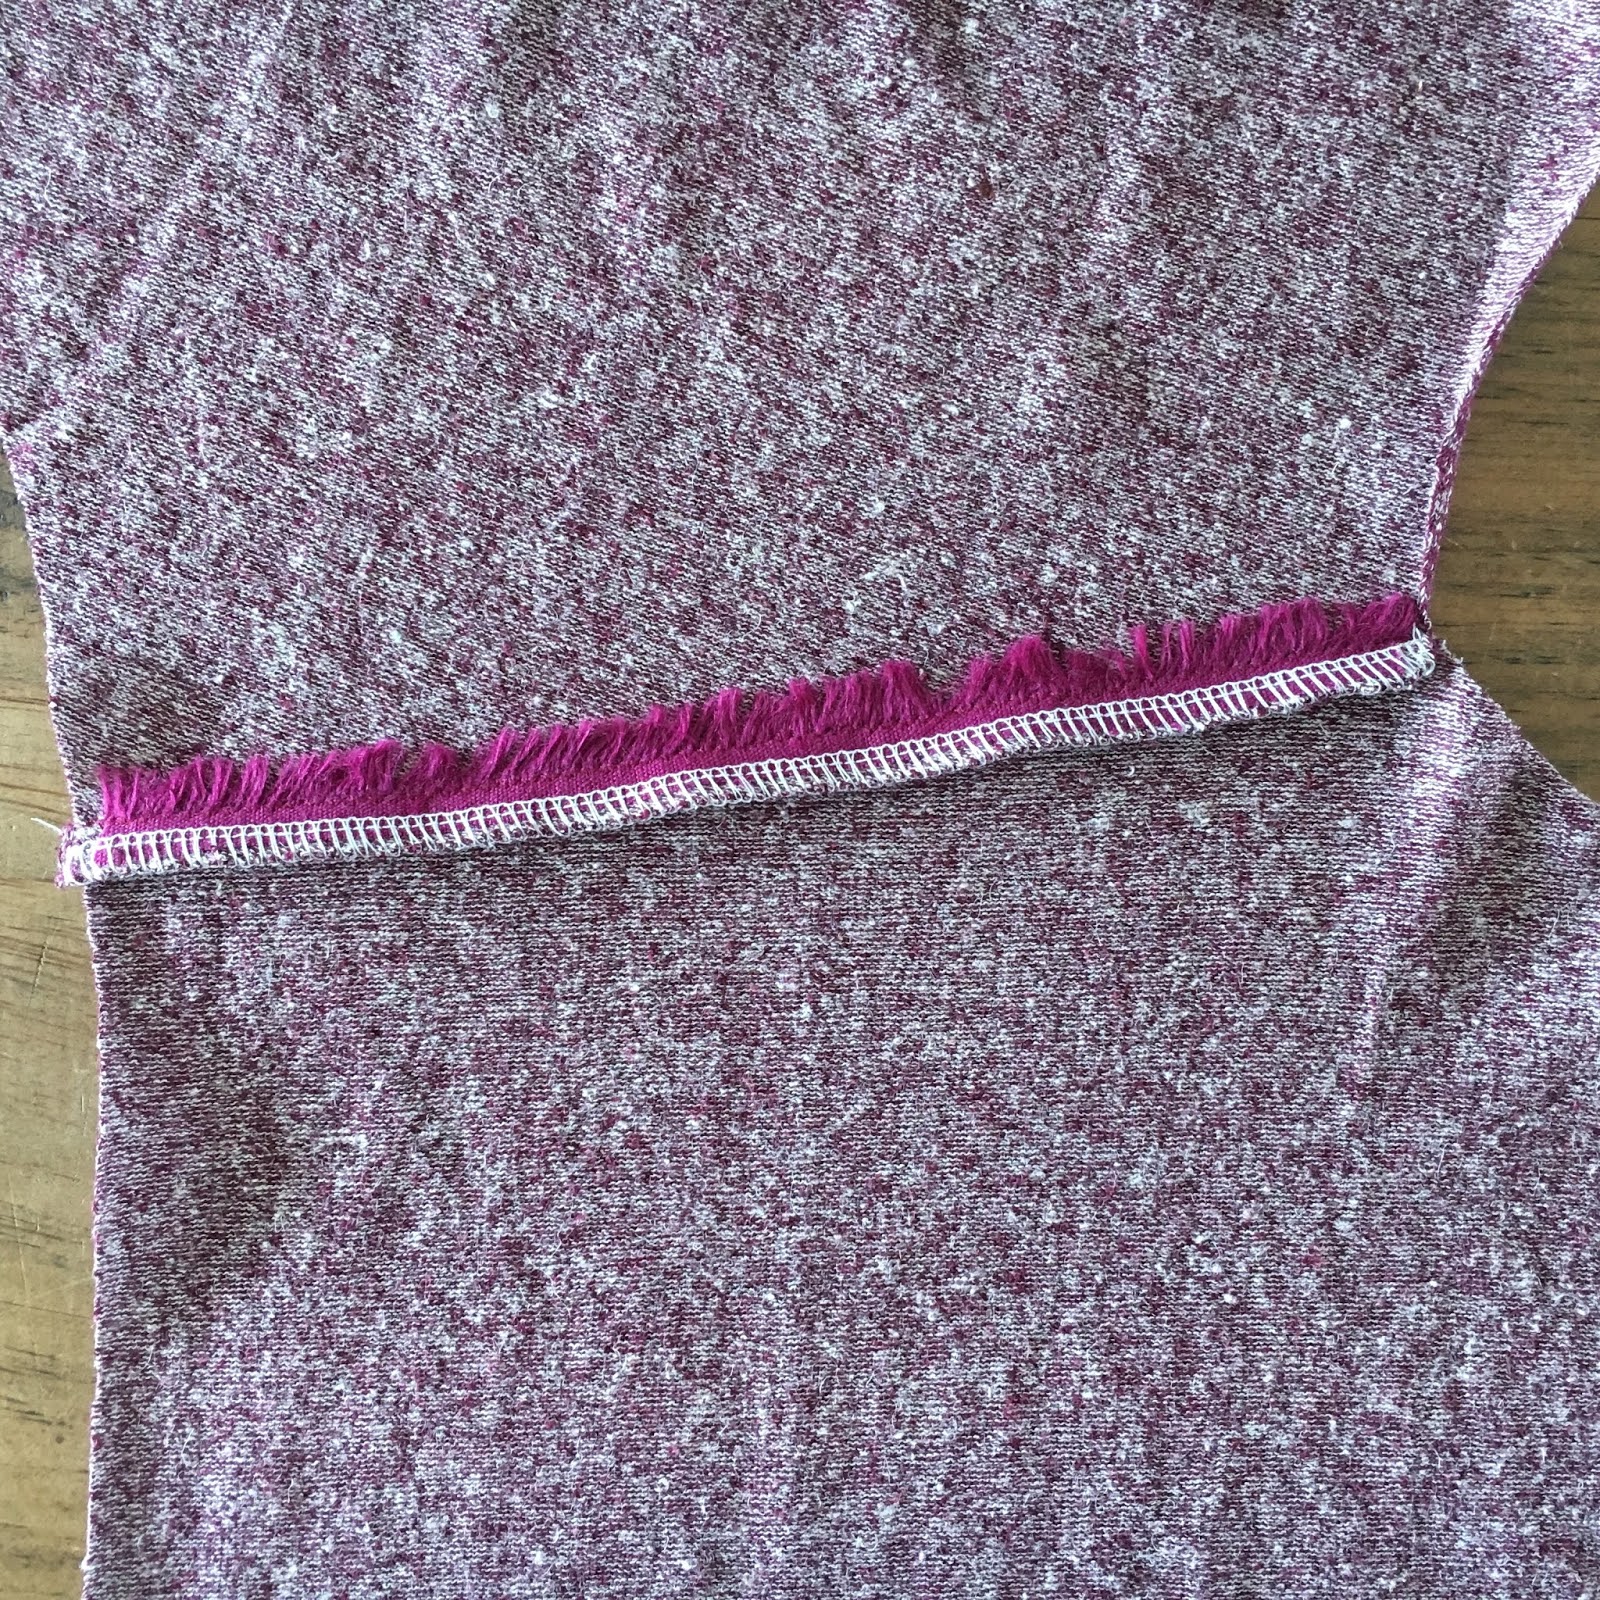 How to make your own stay tape for stabilising seams – Pattern Fantastique